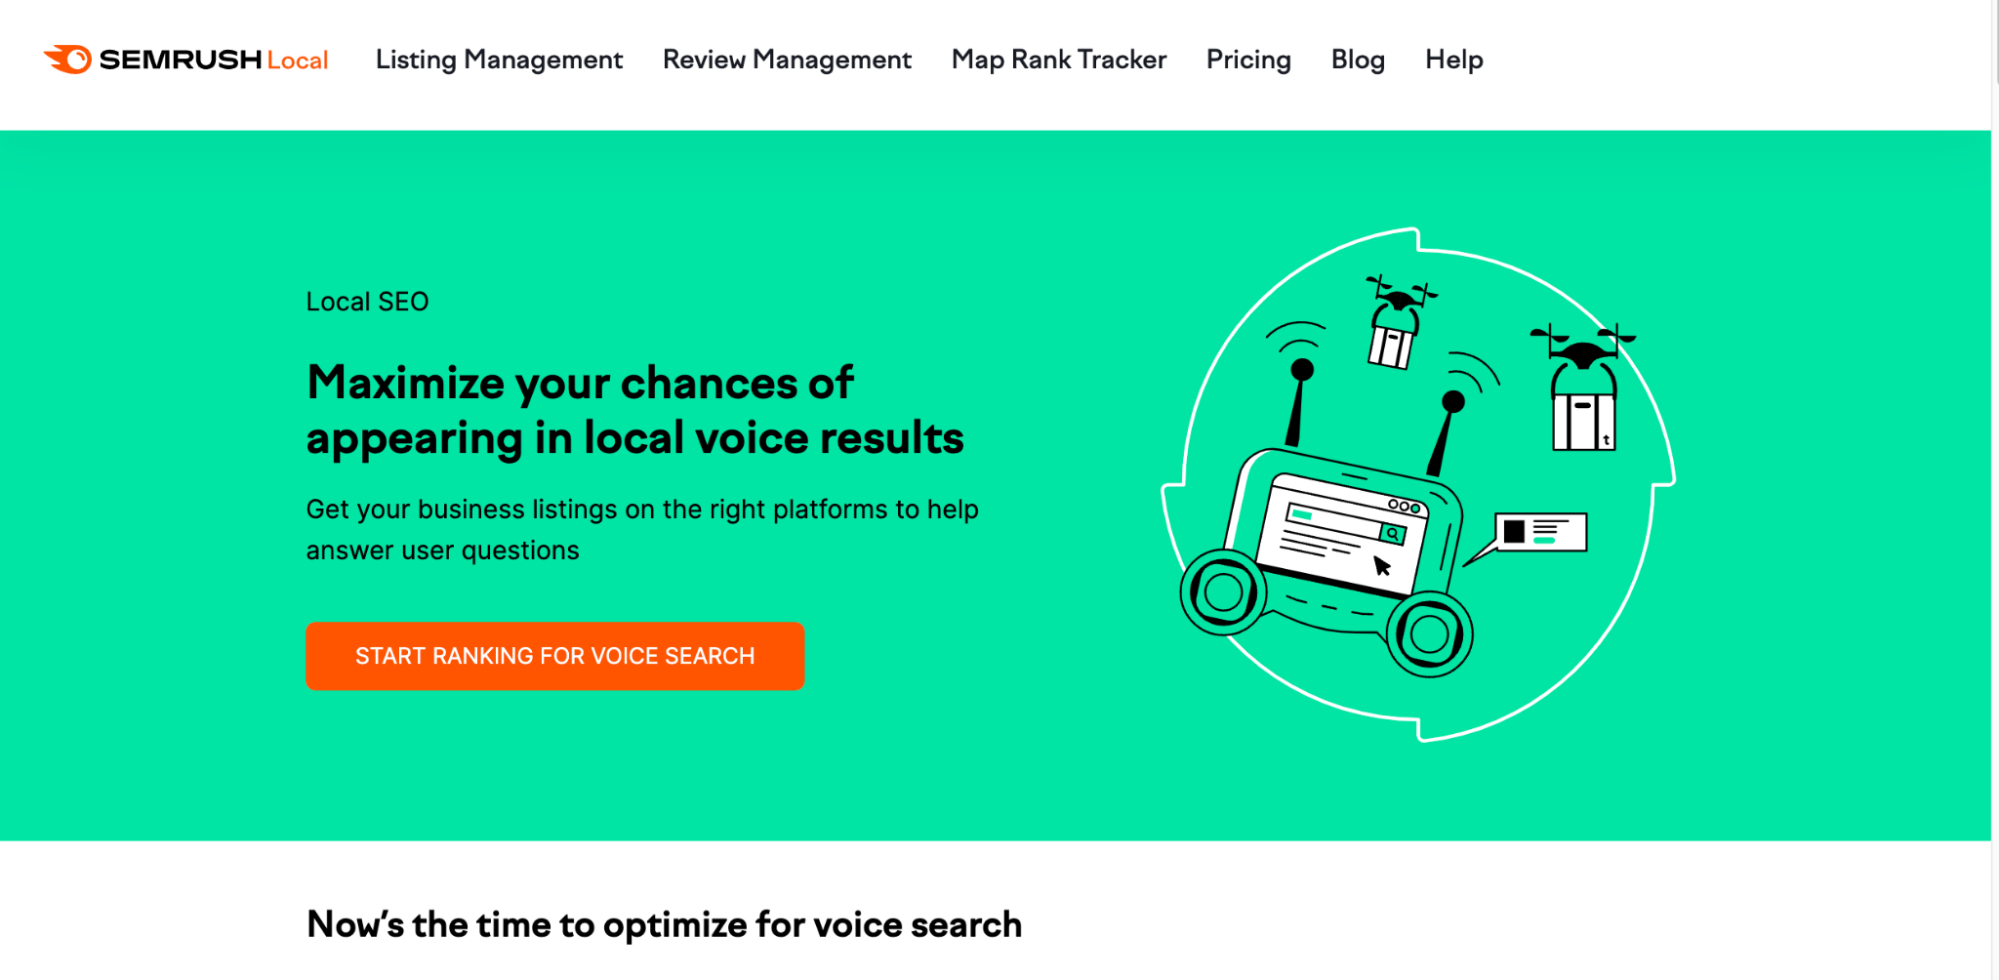 Tools like Semrush help marketers optimize content for voice search and AI virtual assistants